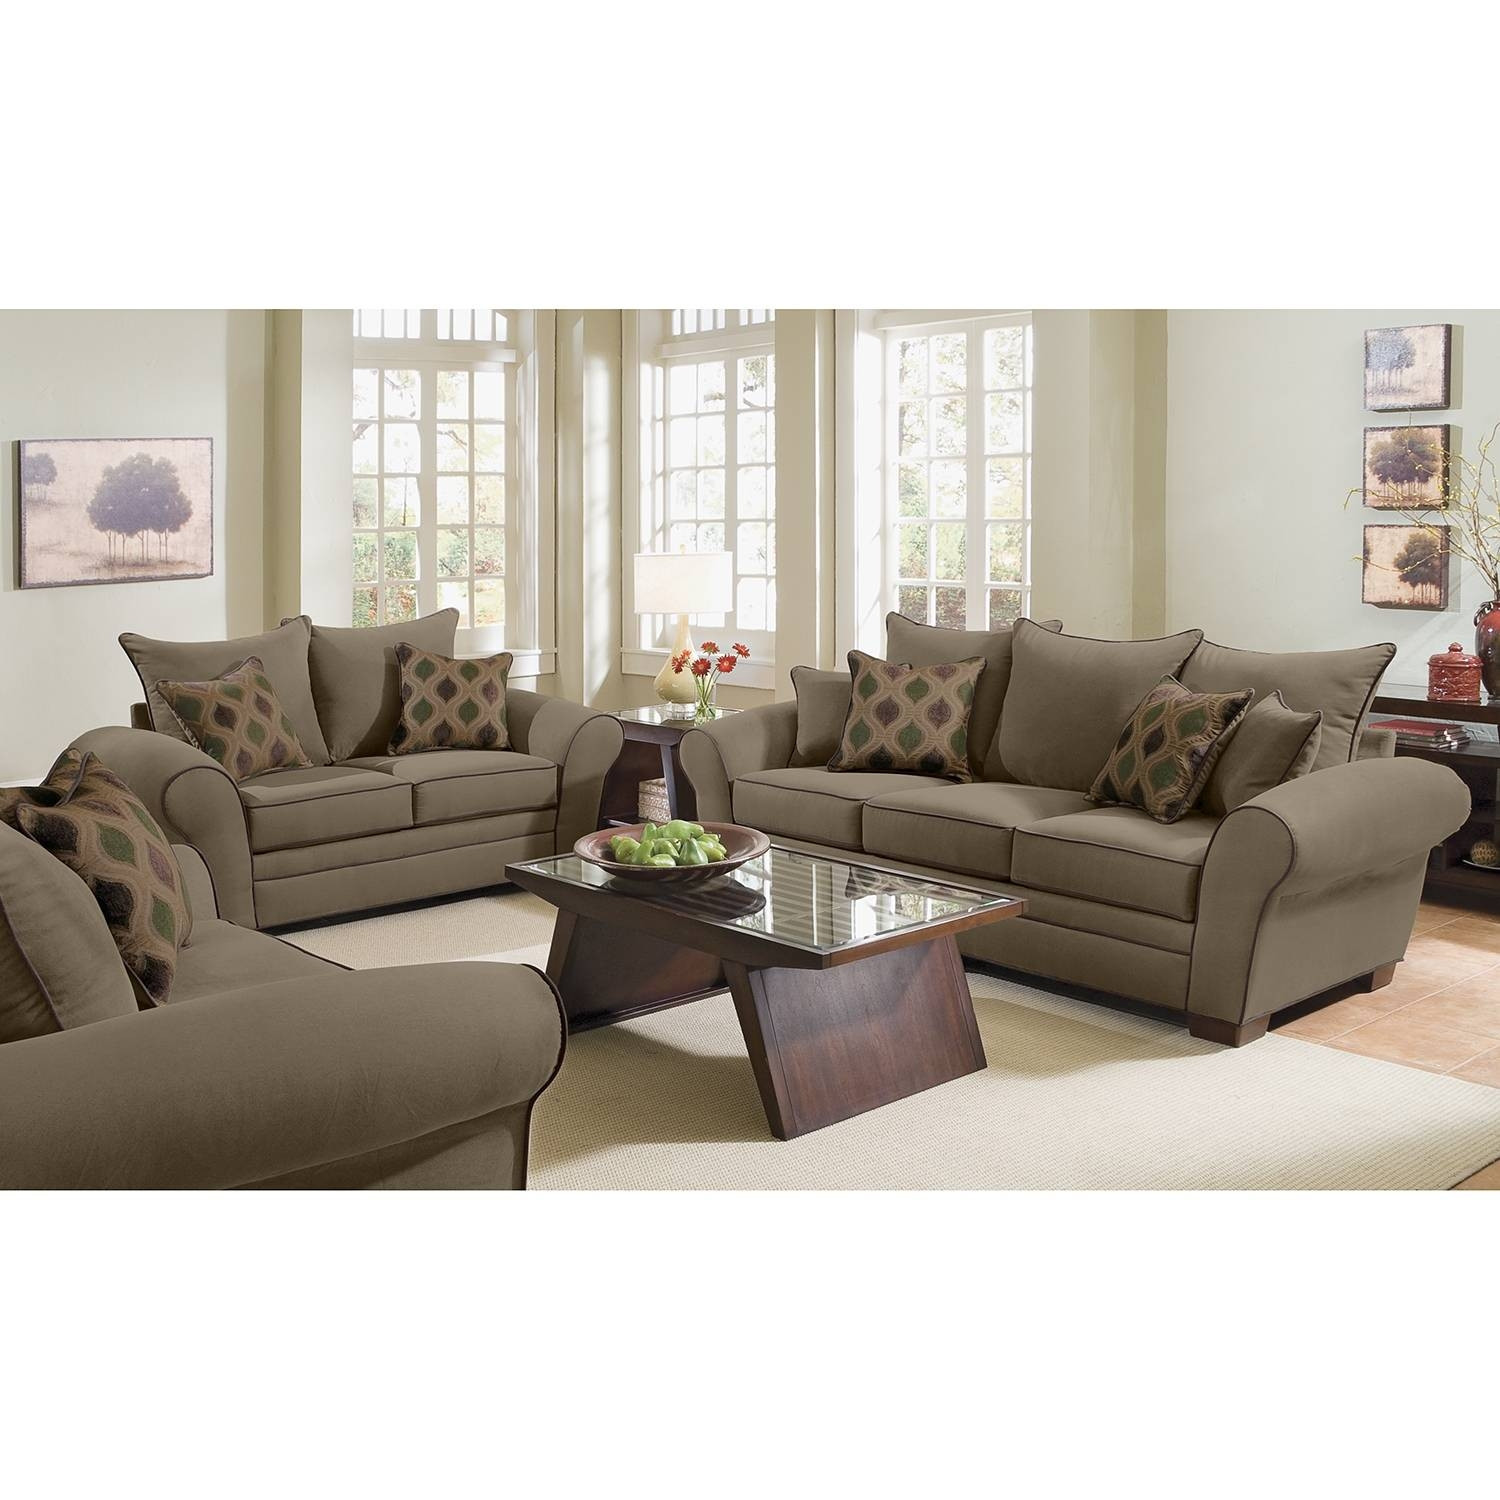 Value City Living Room Tables
 25 Inspirations of Value City Sofas